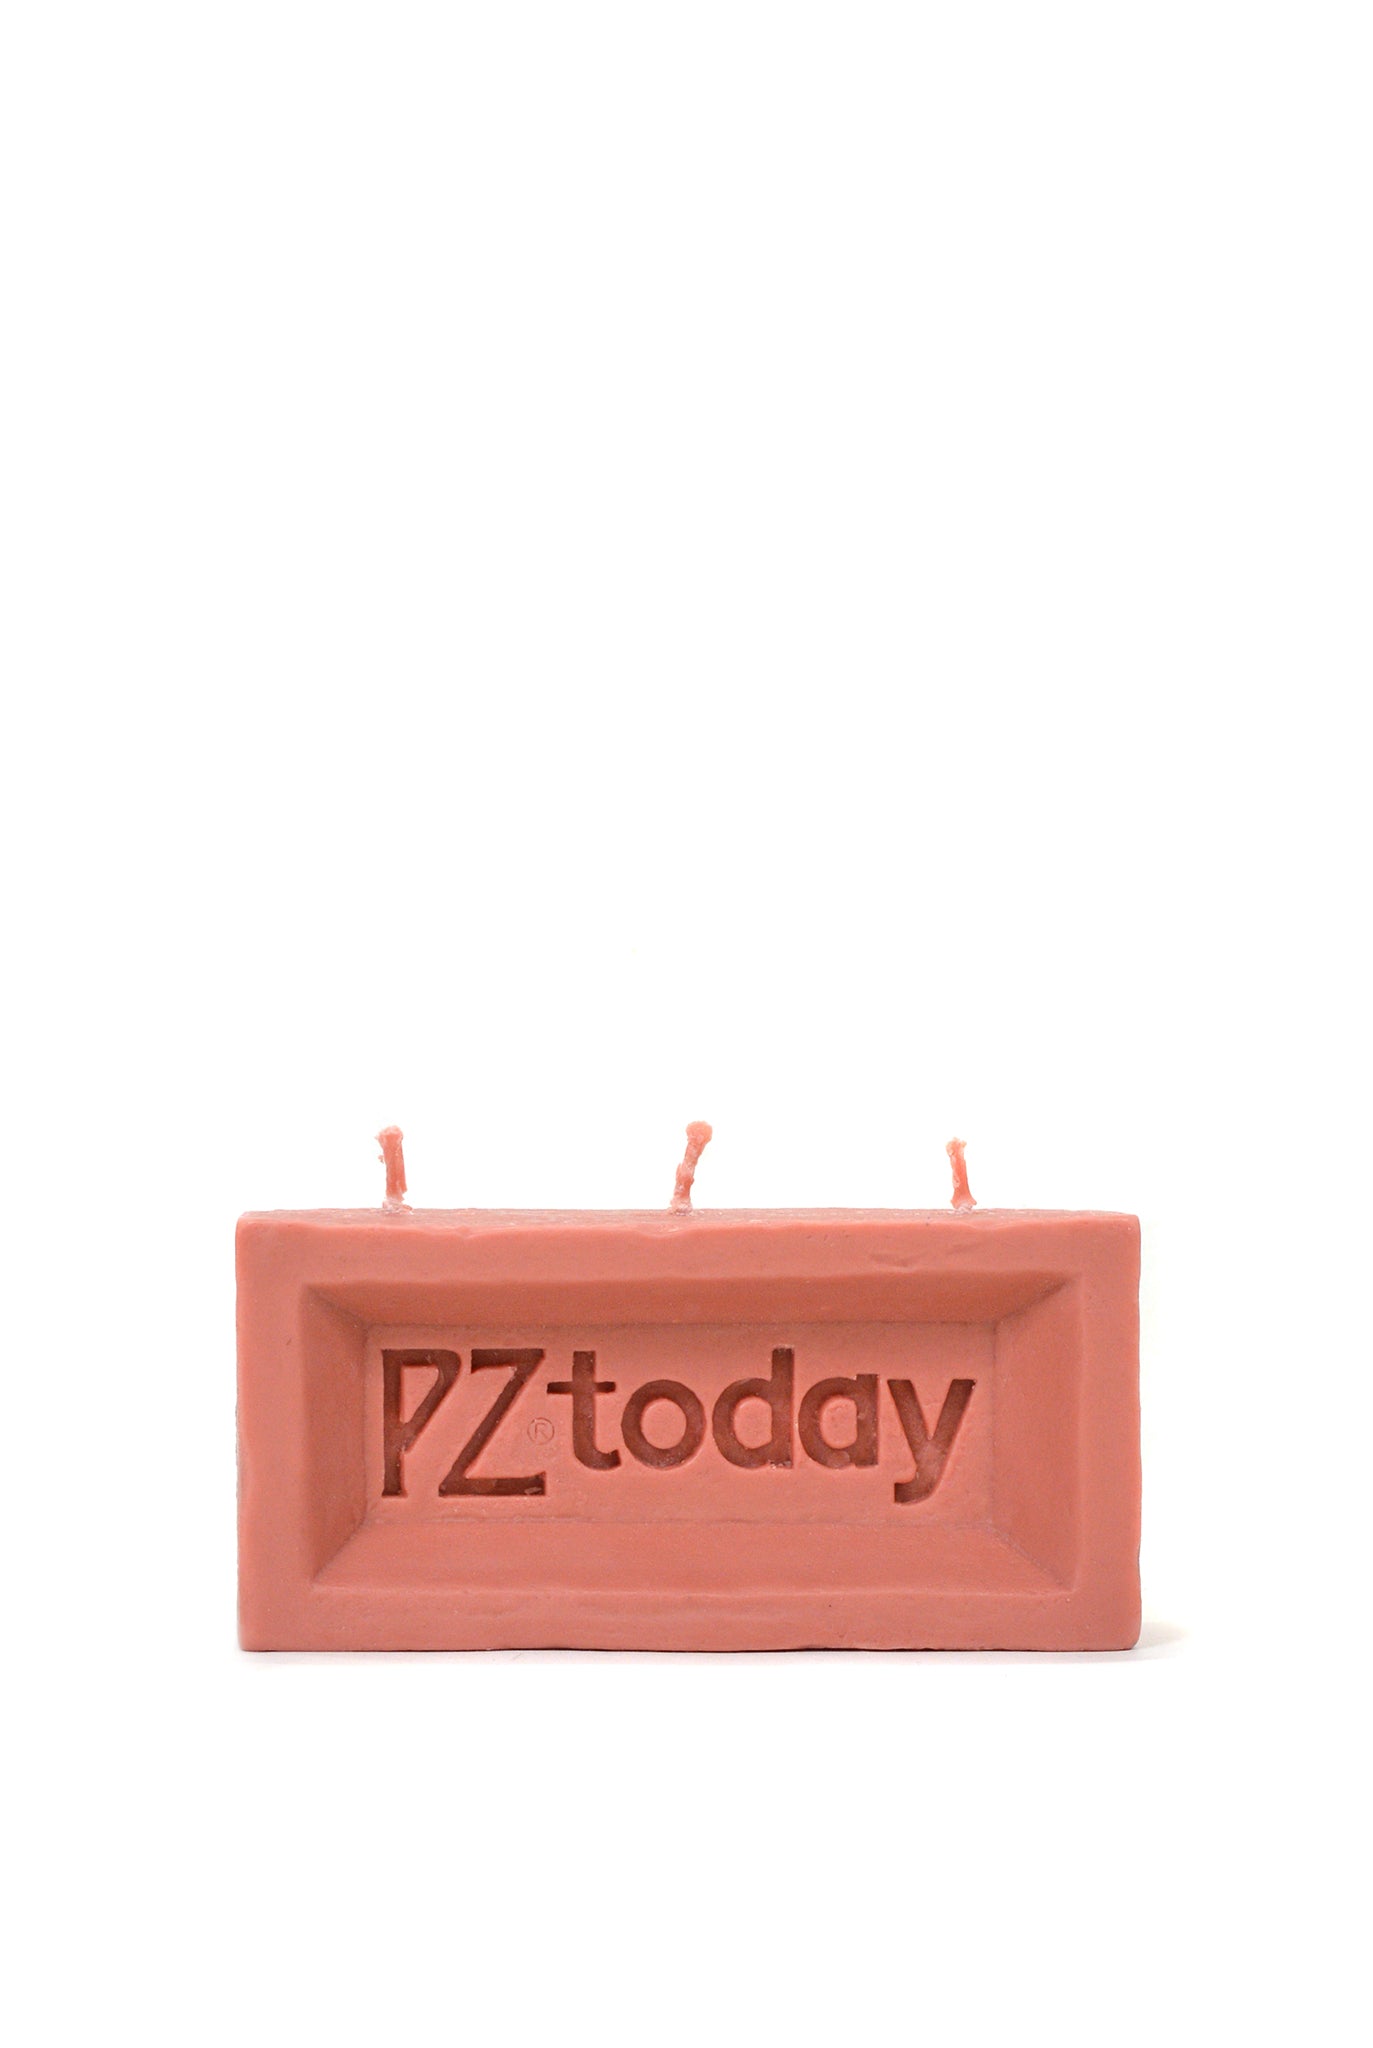 PZtoday© Brick Candle